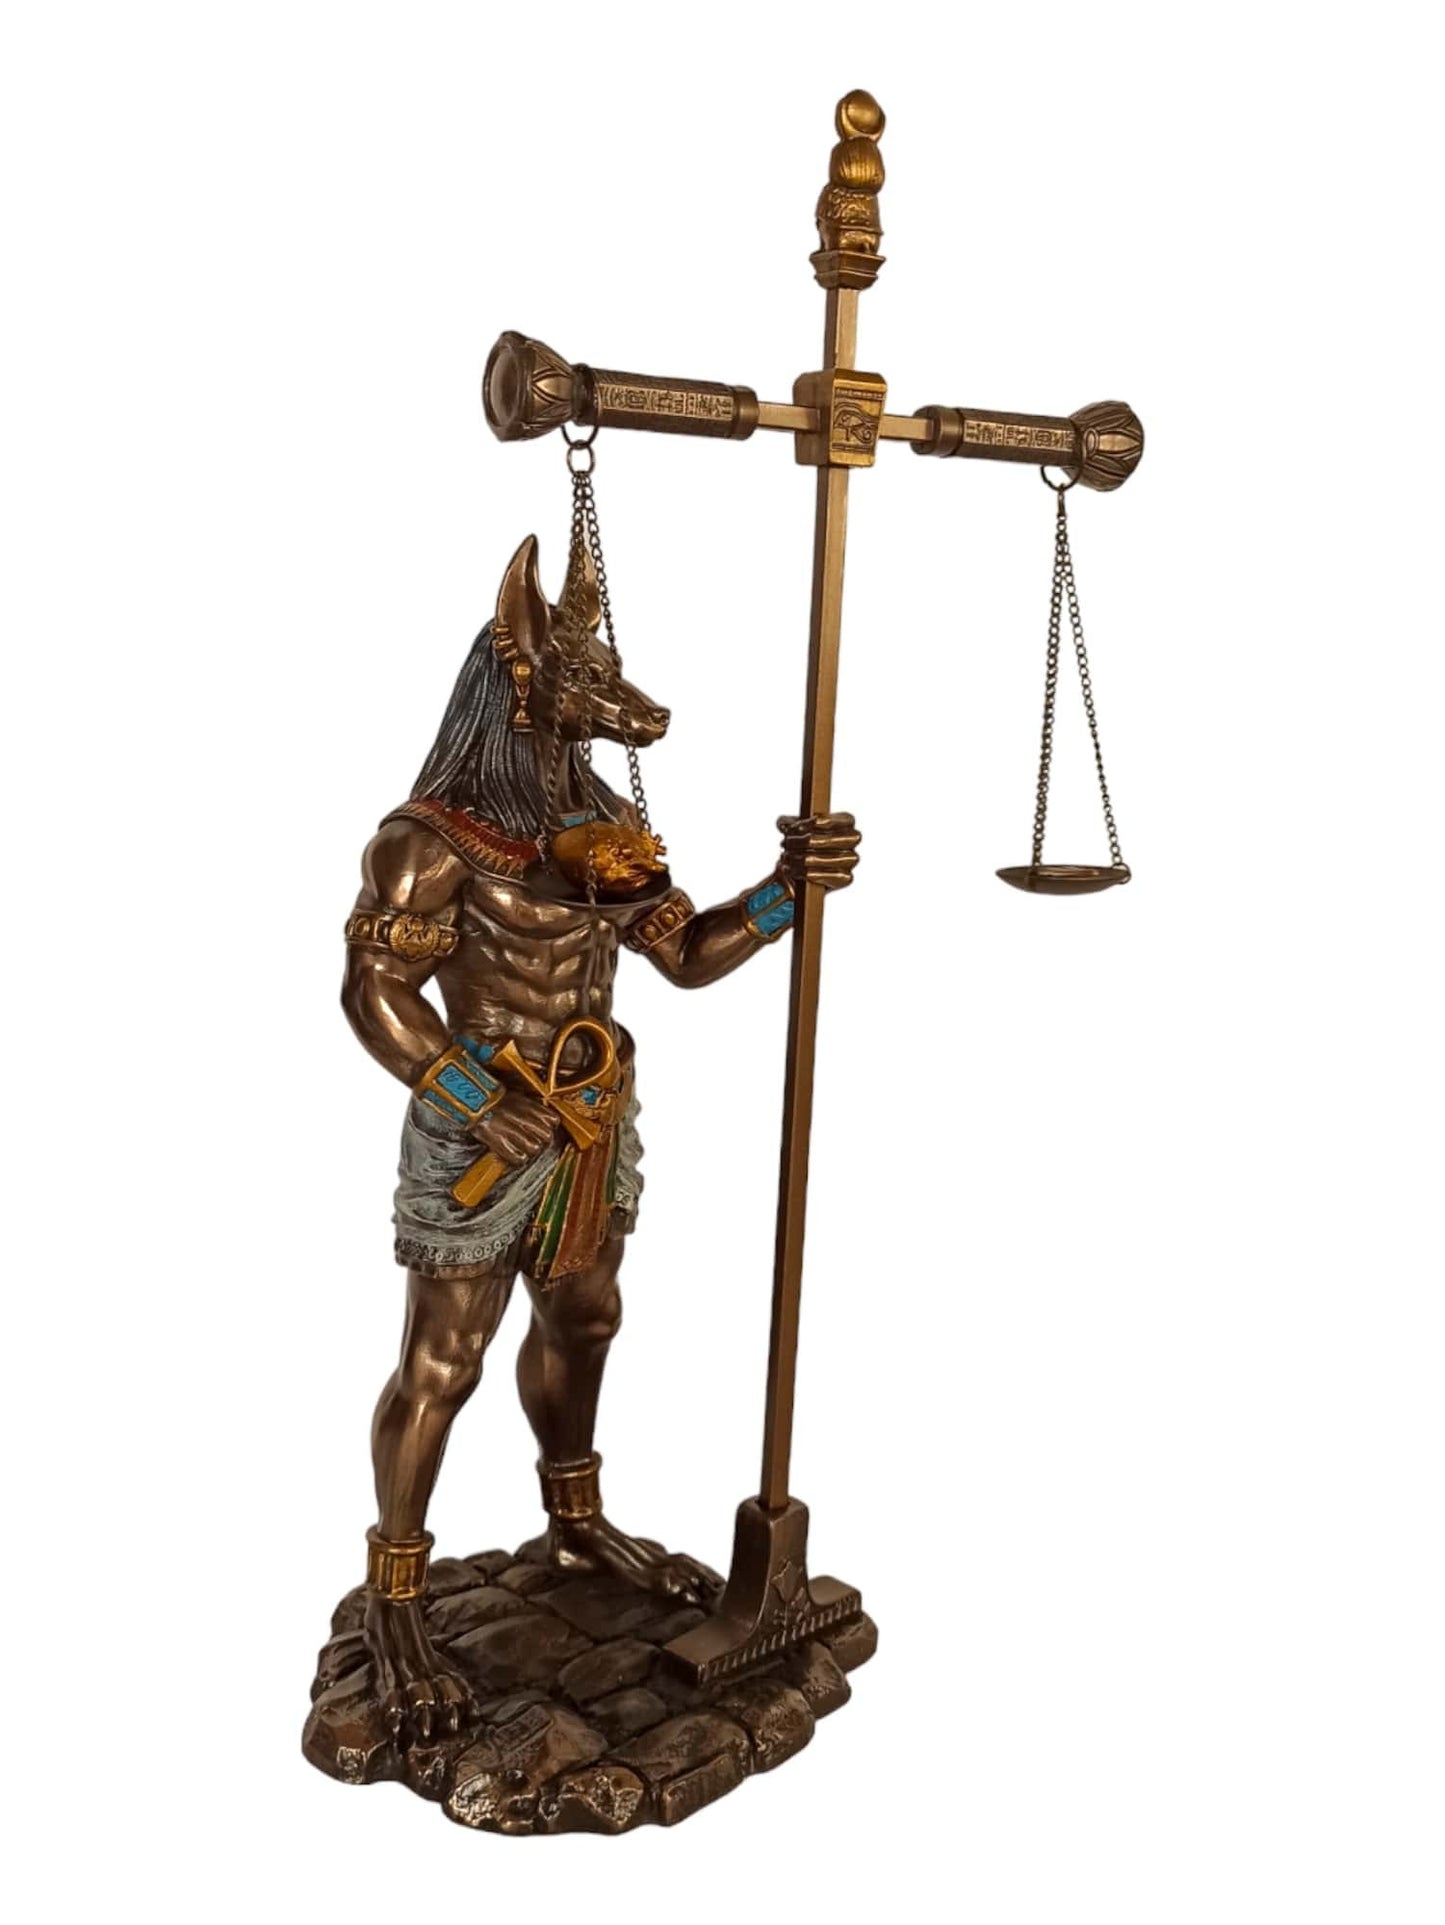 Anubis - The God of Funerary Rites, Protector of Graves, and Guide to the Underworld, in Ancient Egyptian Religion - Cold Cast Bronze Resin